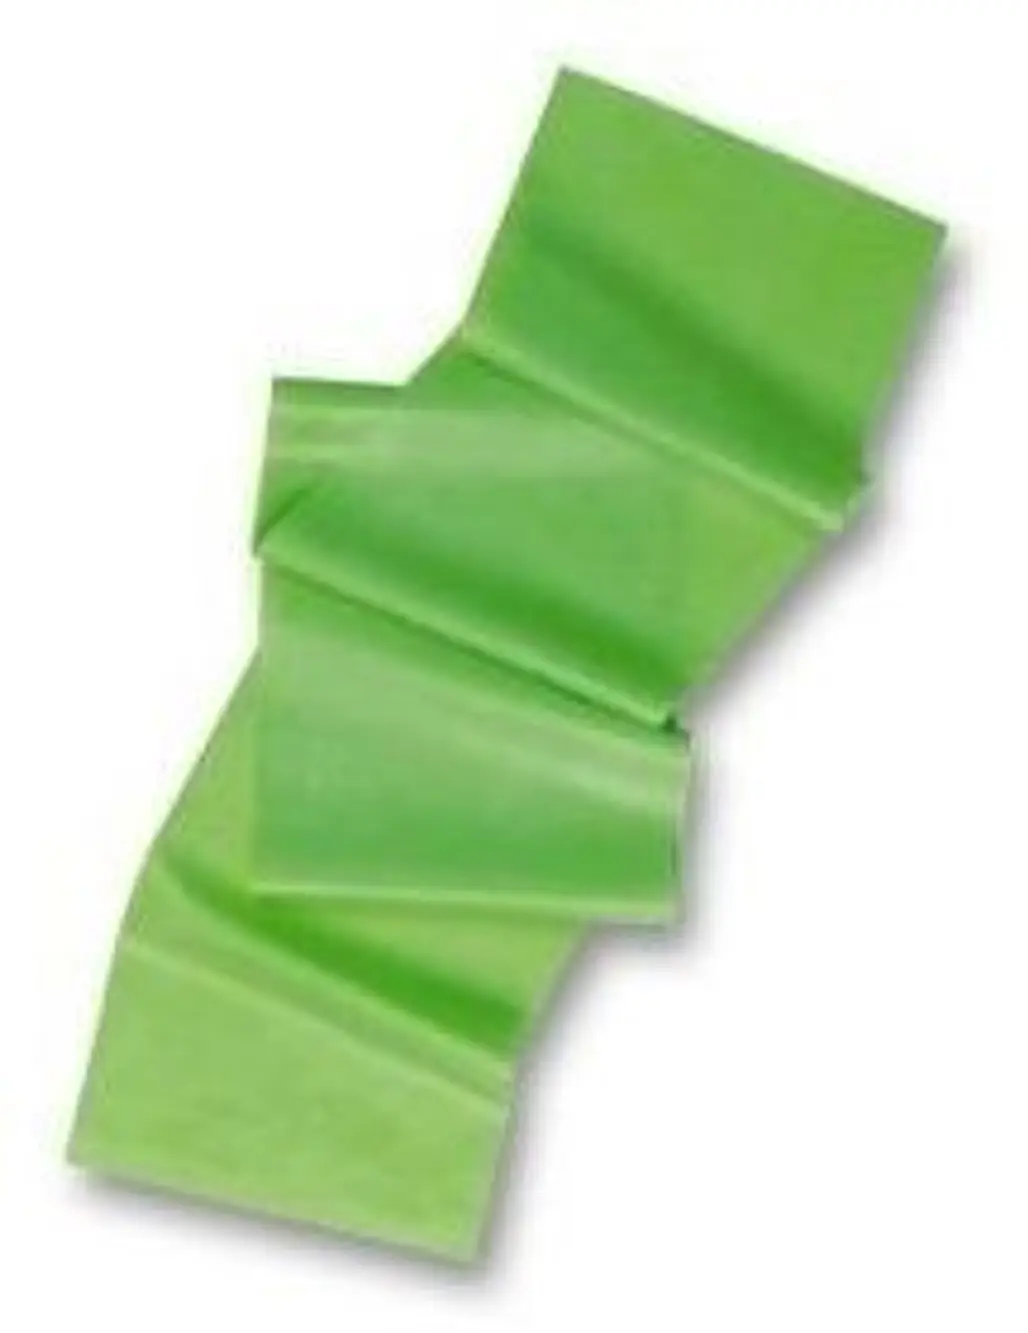 DYNA-BAND 6ft. Green Medium Resistance Band